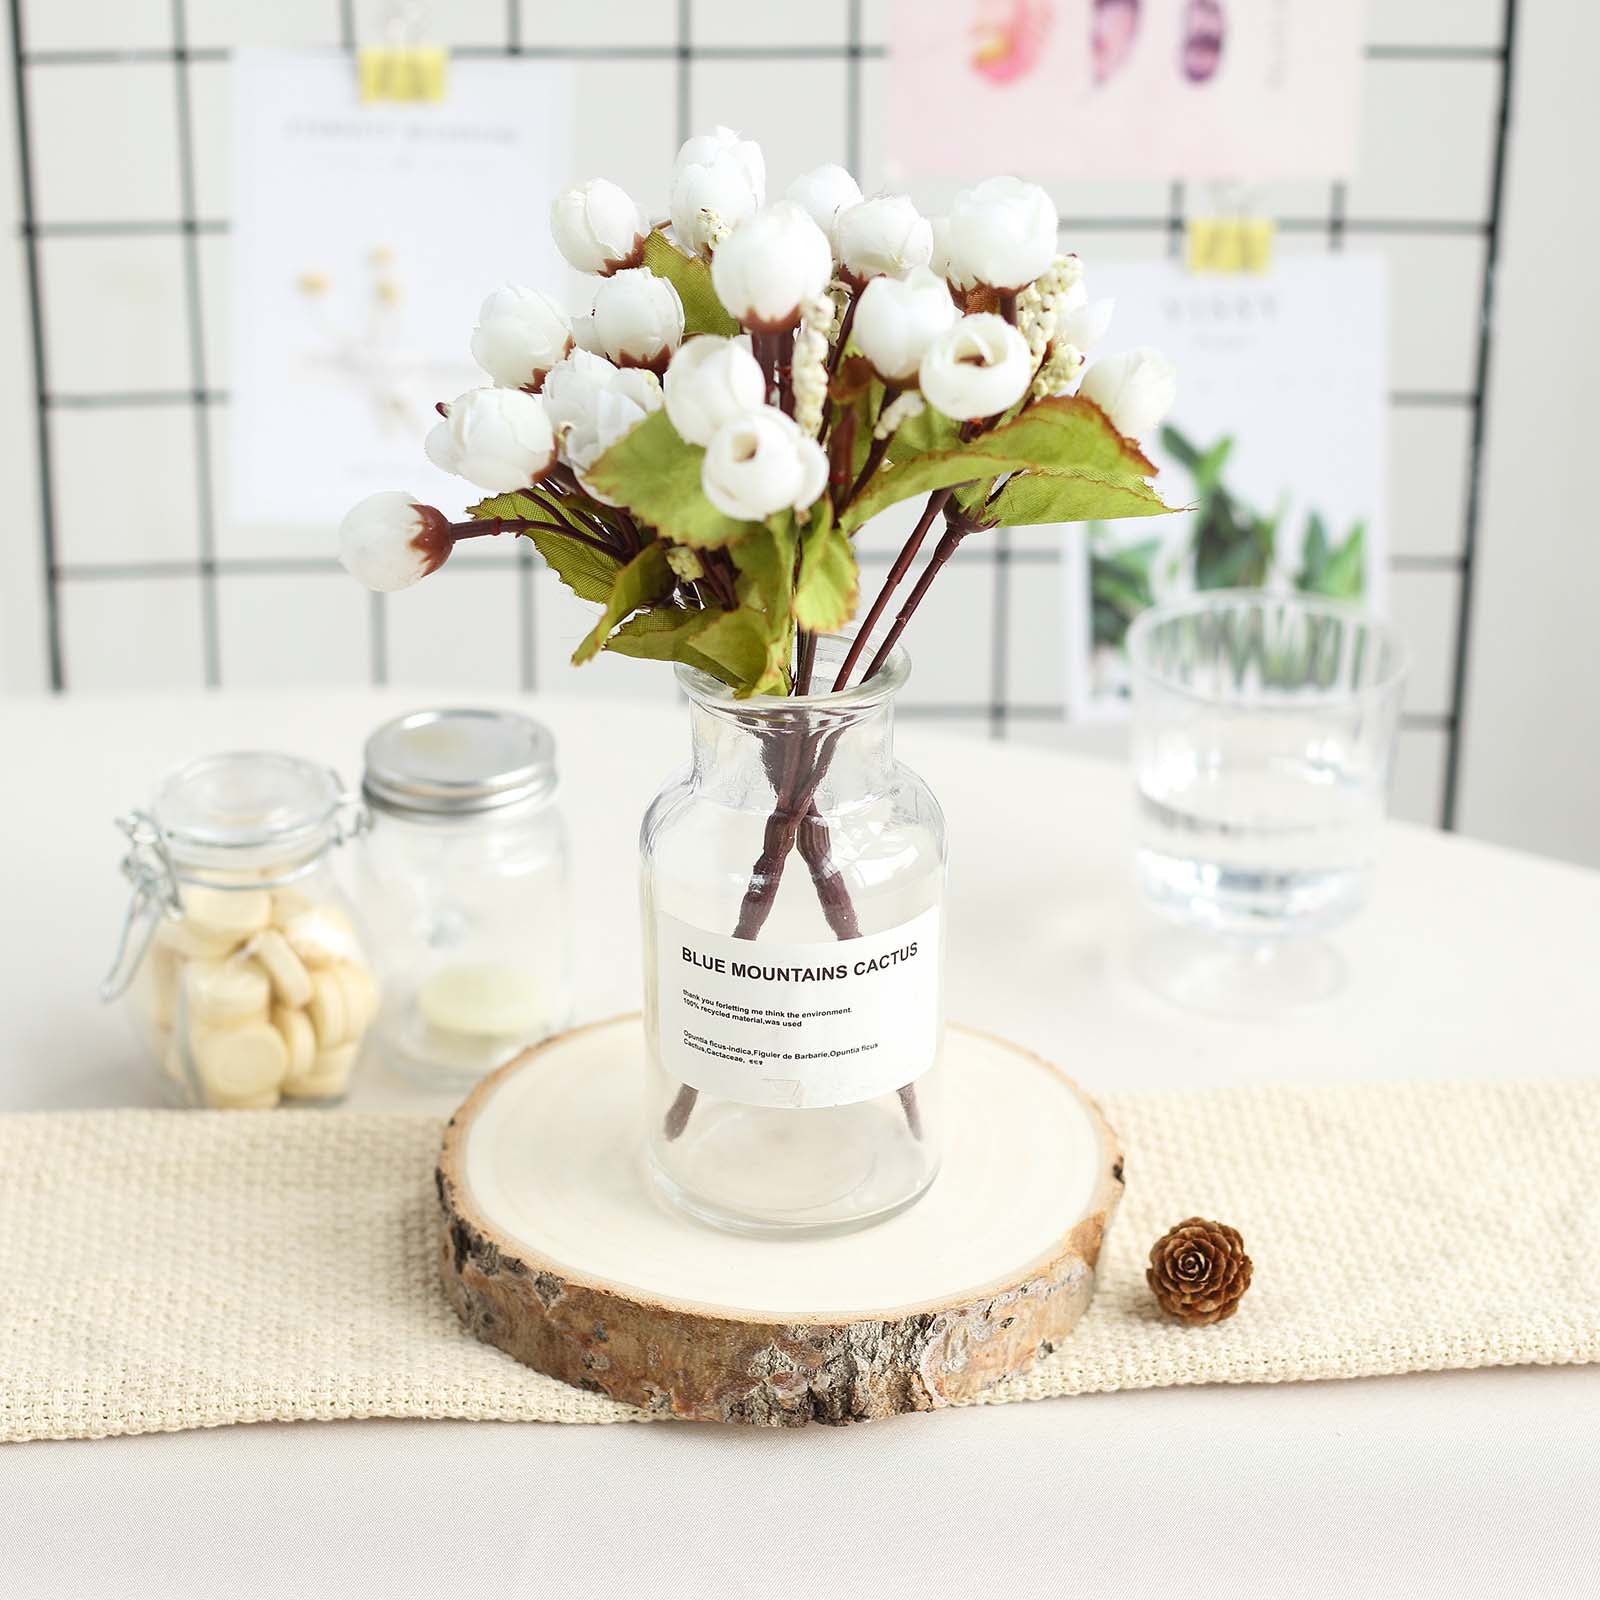 DIY Wooden Slab Centerpieces With Jars and Flowers